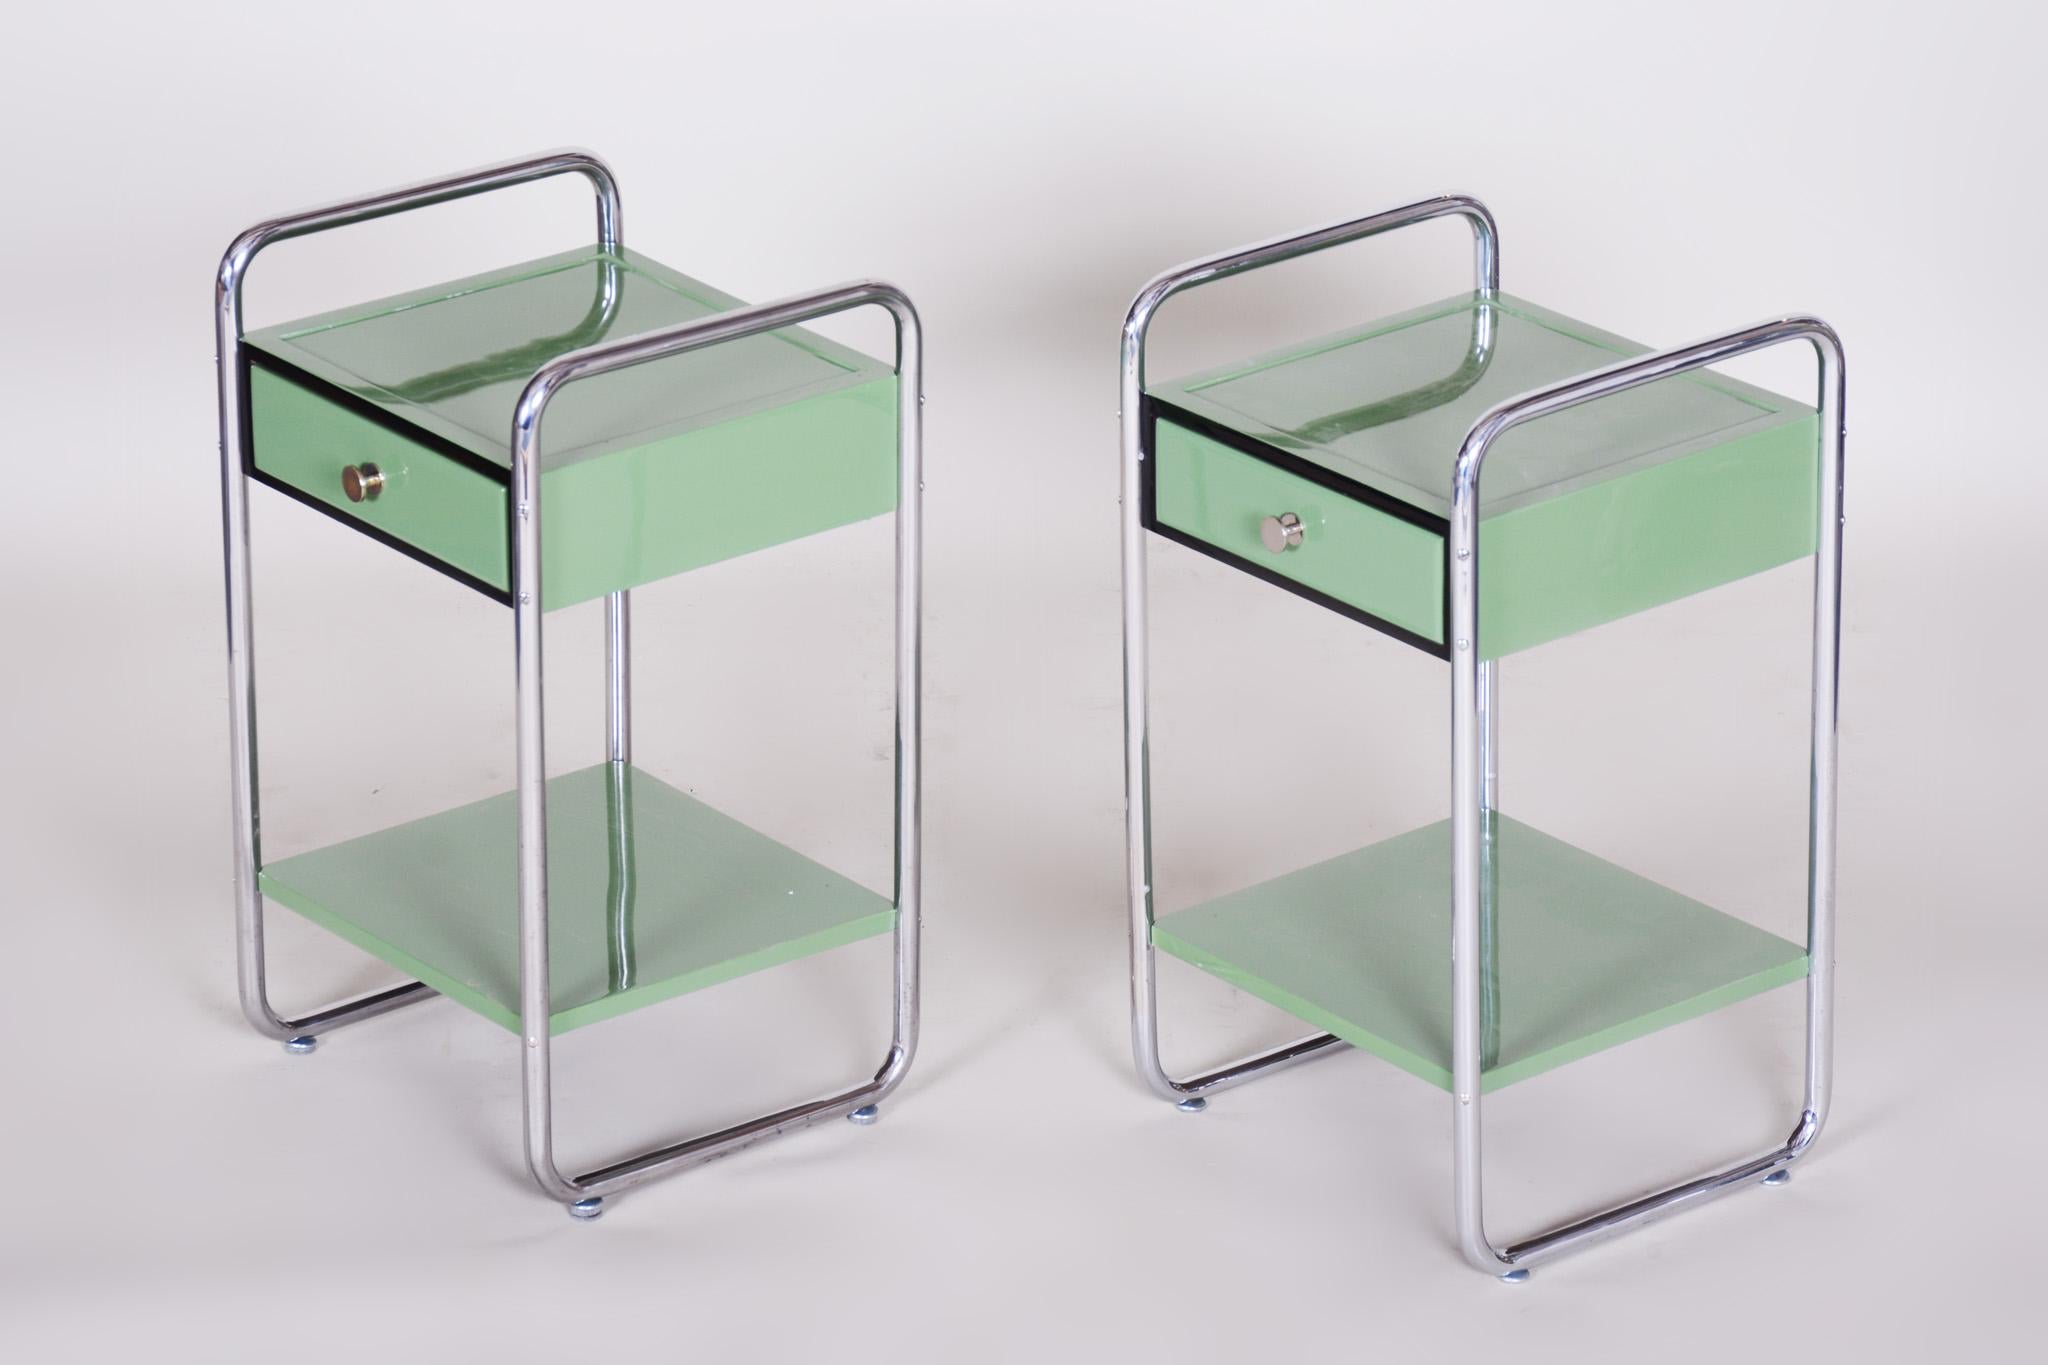 Restored Bauhaus Pair of Bed-Side Tables, Chrome-Plated Steel, Czech, 1930s For Sale 12